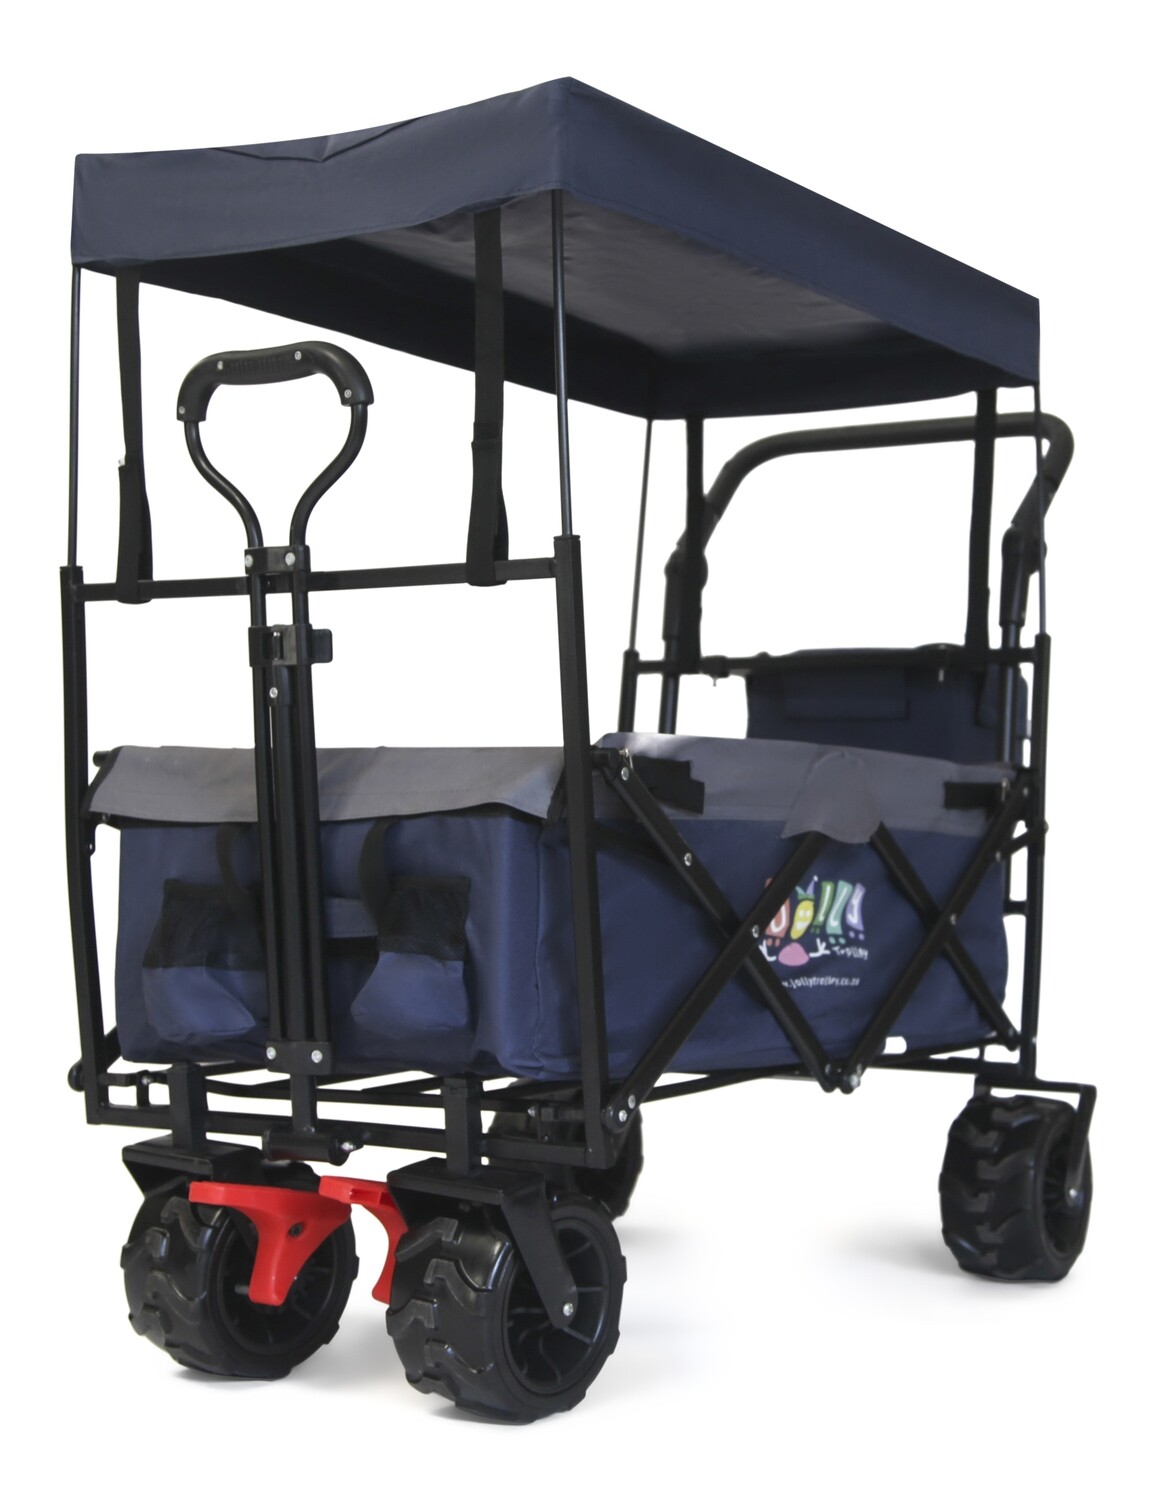 4X4 FAMILY Jolly Trolley with Canopy push and pull handle and Cooler bag